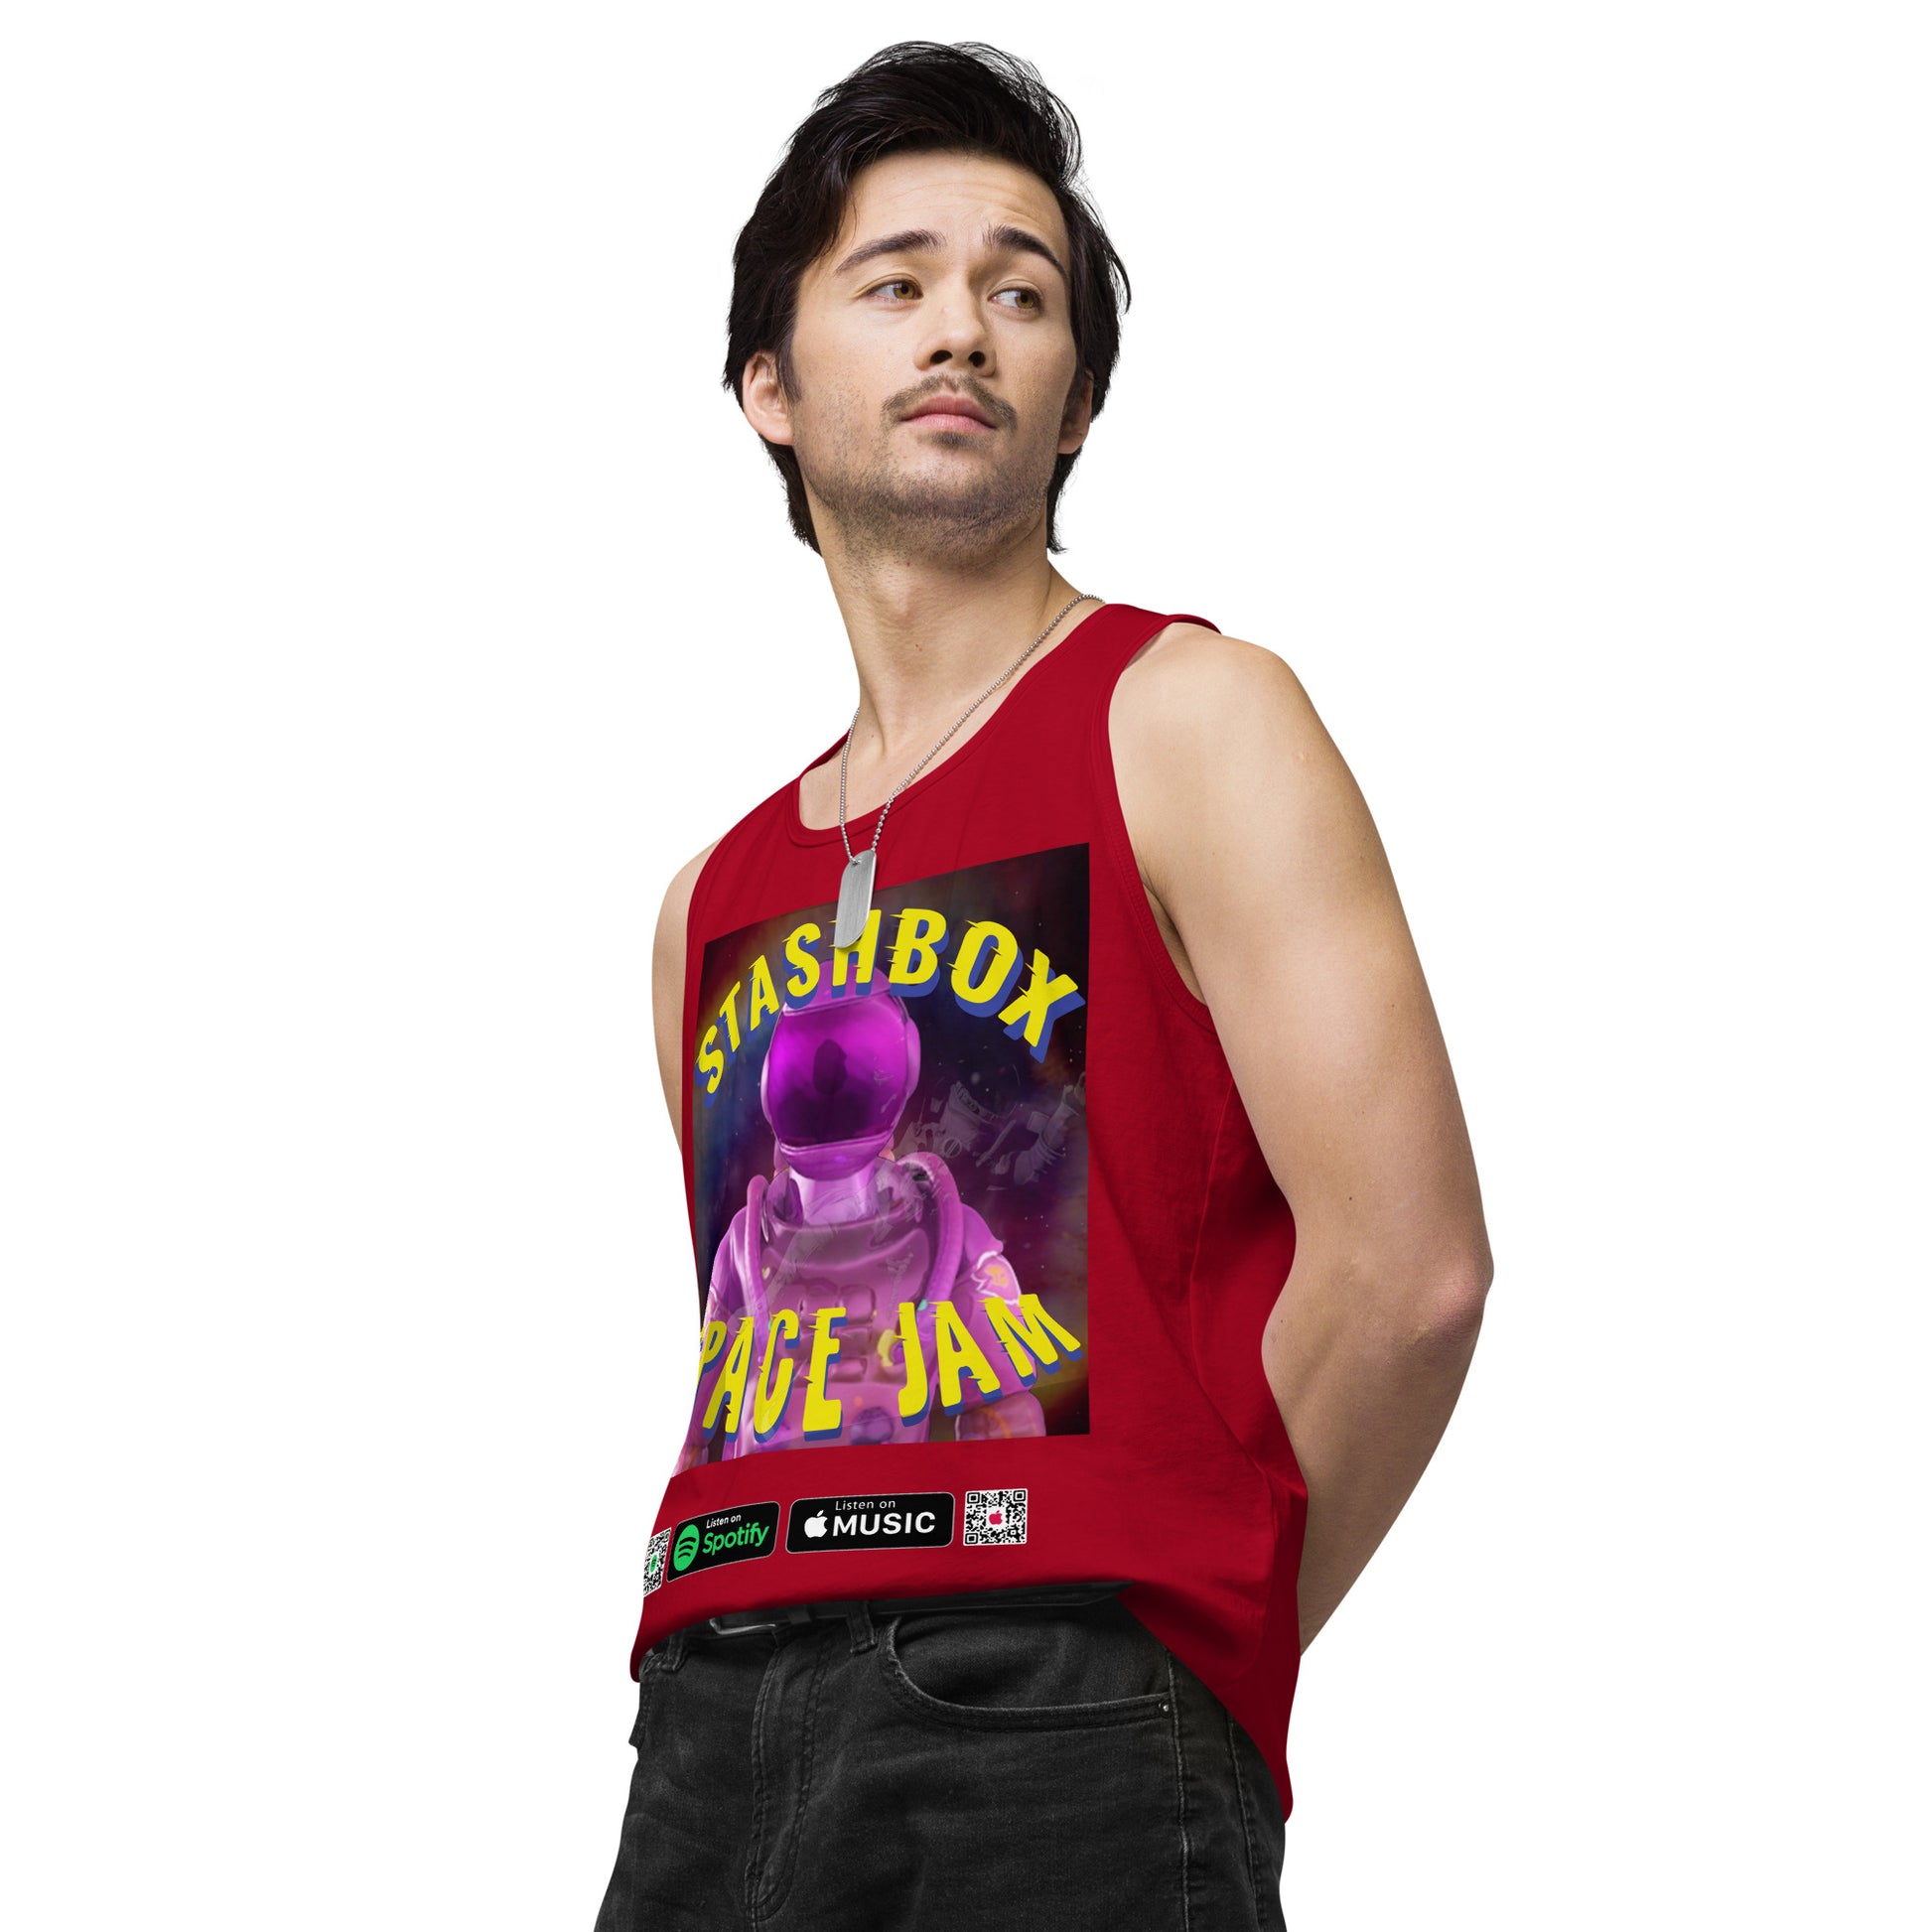 Beyond Gravity: Space Jam - Stashbox Men’s Premium Tank Top, Artwork #005. Elevate your wardrobe to intergalactic heights with this premium tank. A fusion of art and astronomy, perfect for those who find inspiration in the cosmos. #StashboxGalacticArt #SpaceFashion #AstronomyLovers